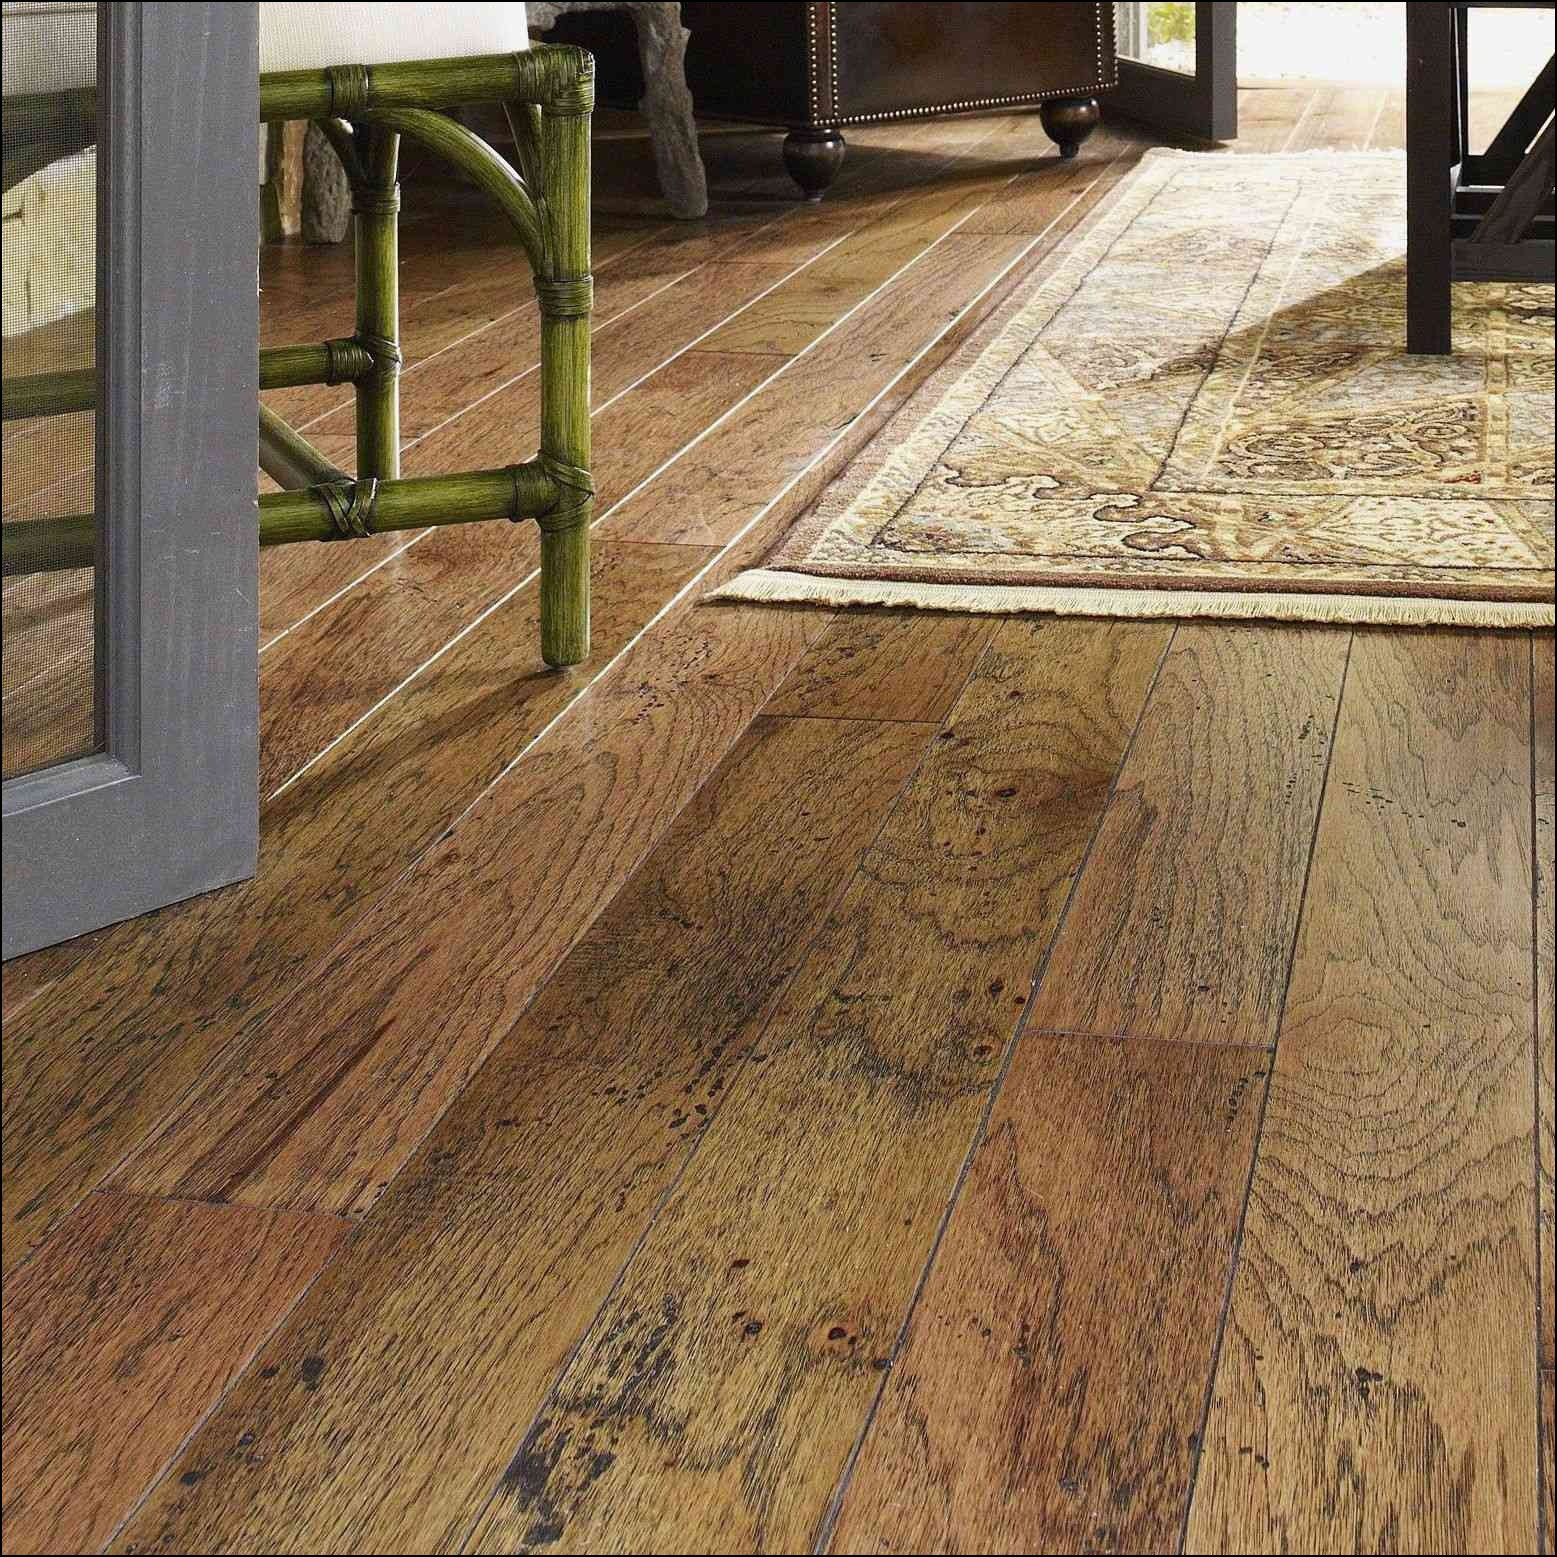 20 Popular Hardwood Floor Steam Cleaners Consumer Reports 2024 free download hardwood floor steam cleaners consumer reports of what is flooring ideas intended for what is the best gym flooring images best type wood flooring best floor floor wood floor